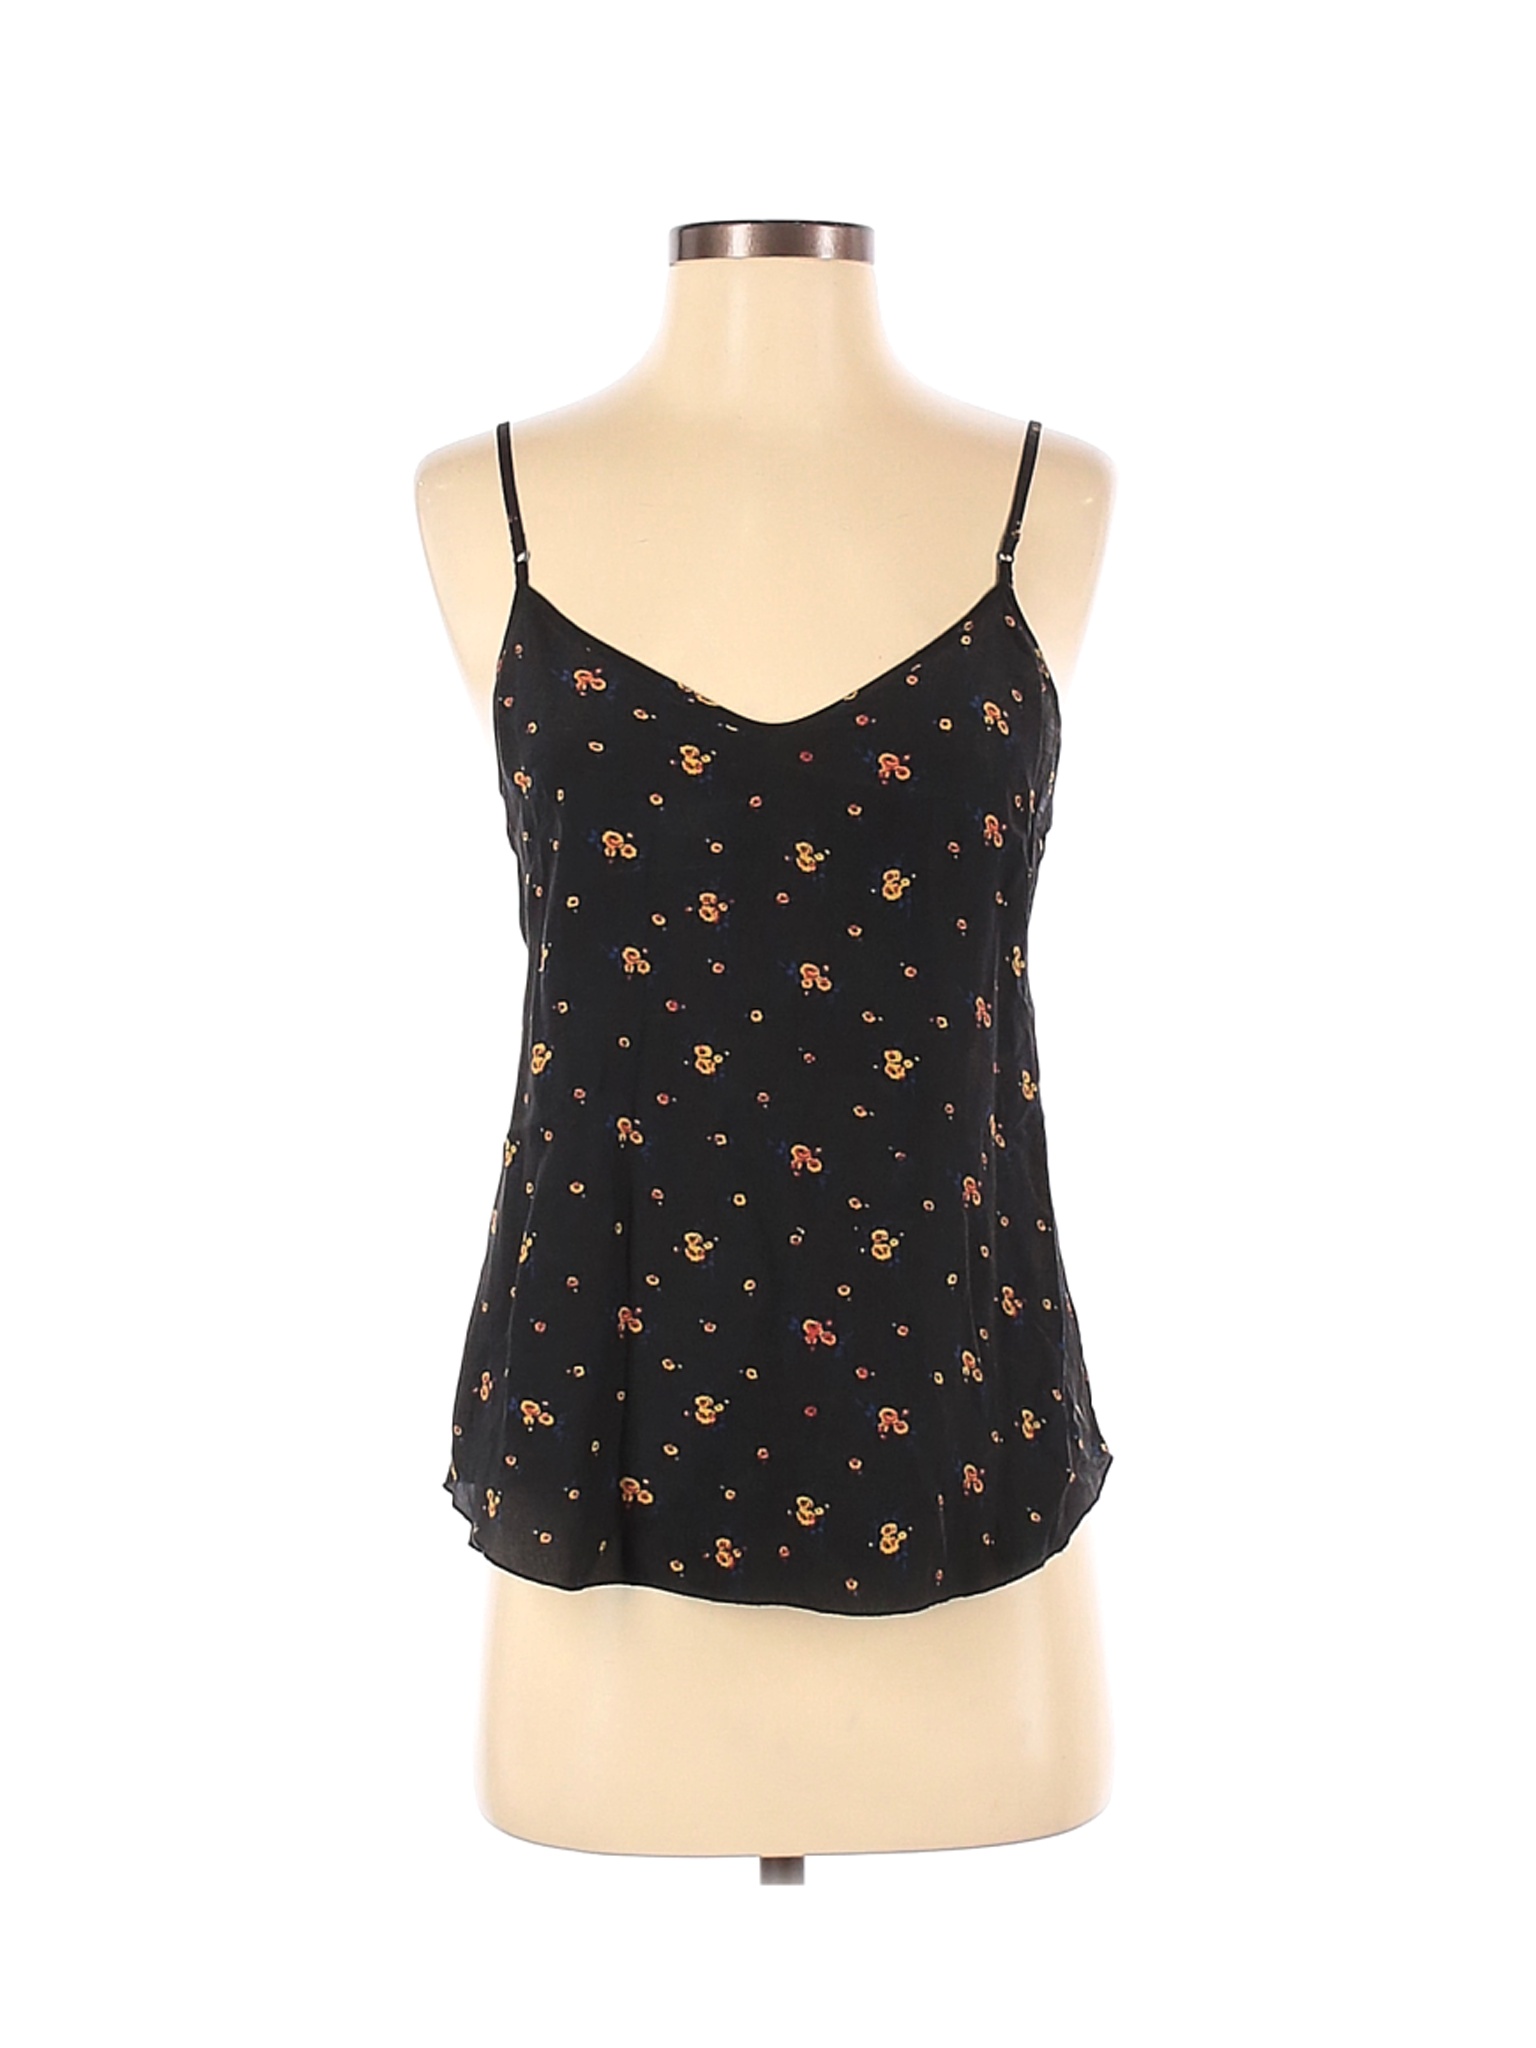 Wilfred 100% Silk Floral Black Sleeveless Silk Top Size XS - 82% off ...